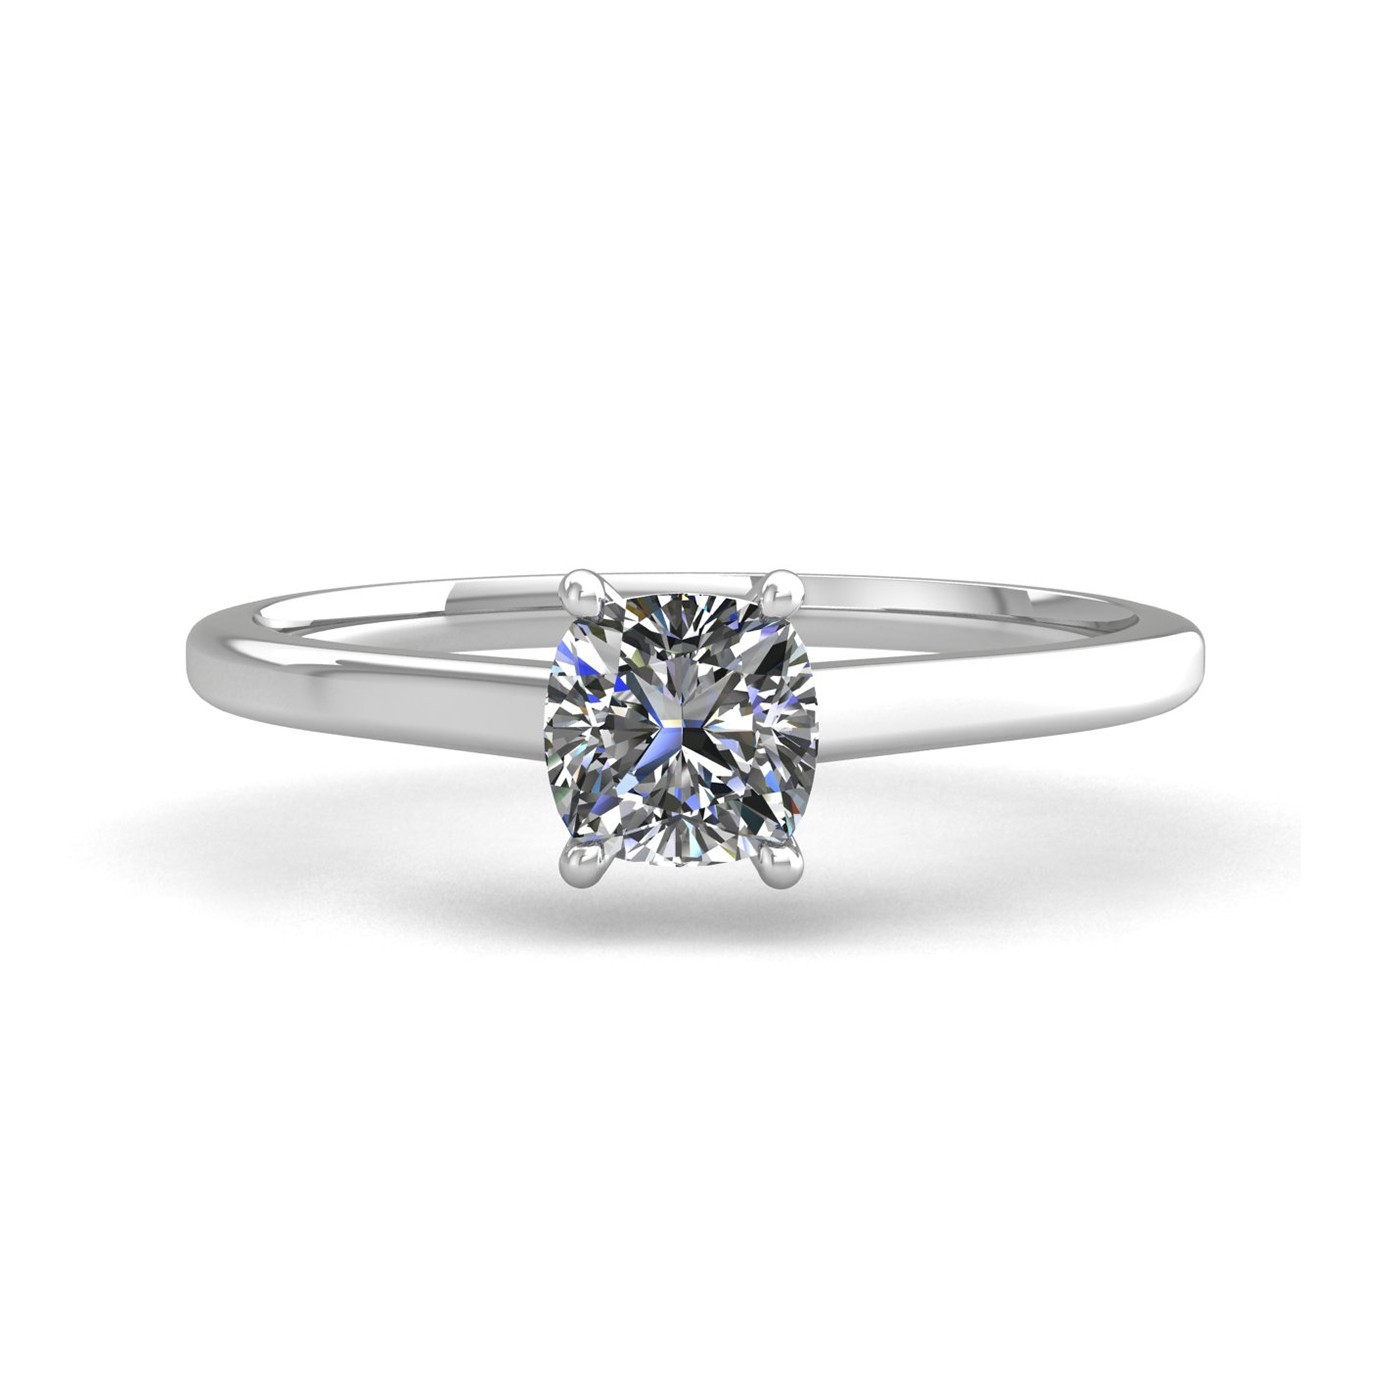 18k white gold 0,80 ct 4 prongs solitaire cushion cut diamond engagement ring with whisper thin band Photos & images